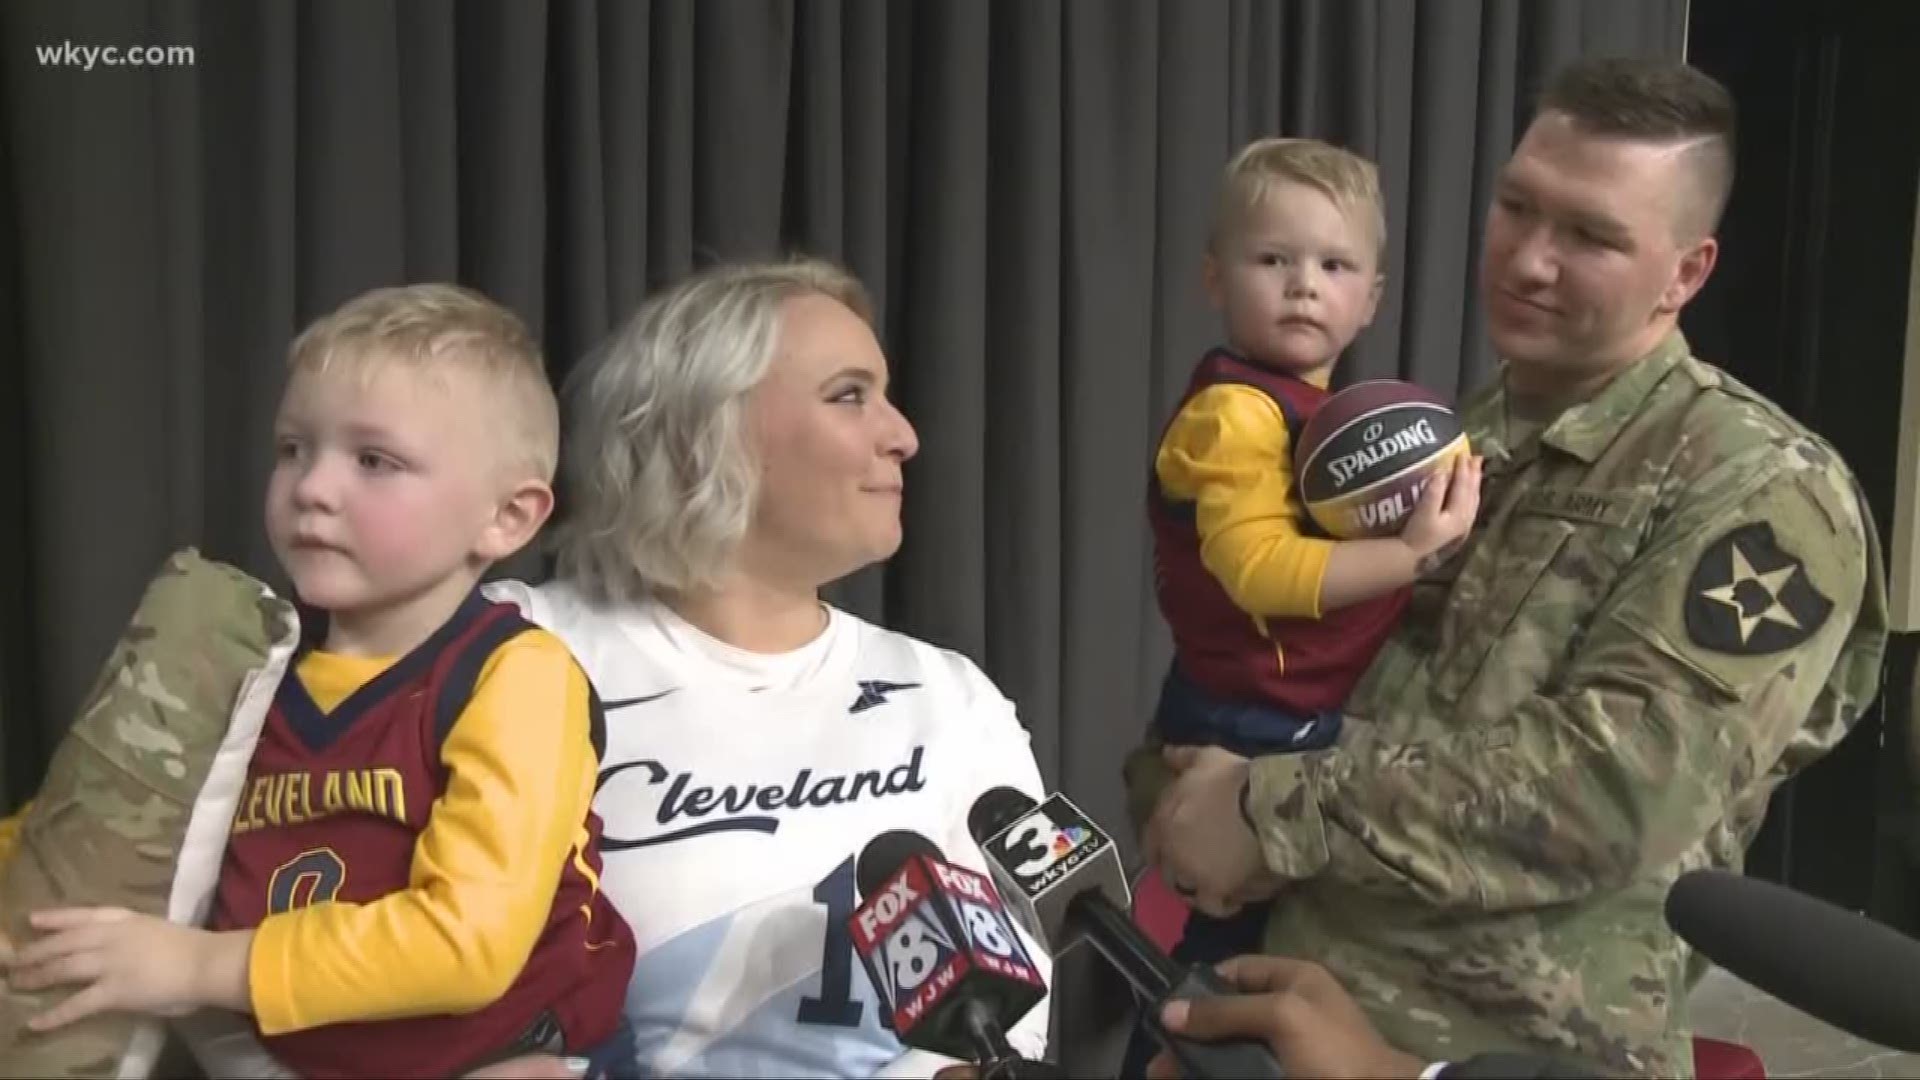 Cavs surprise family with homecoming